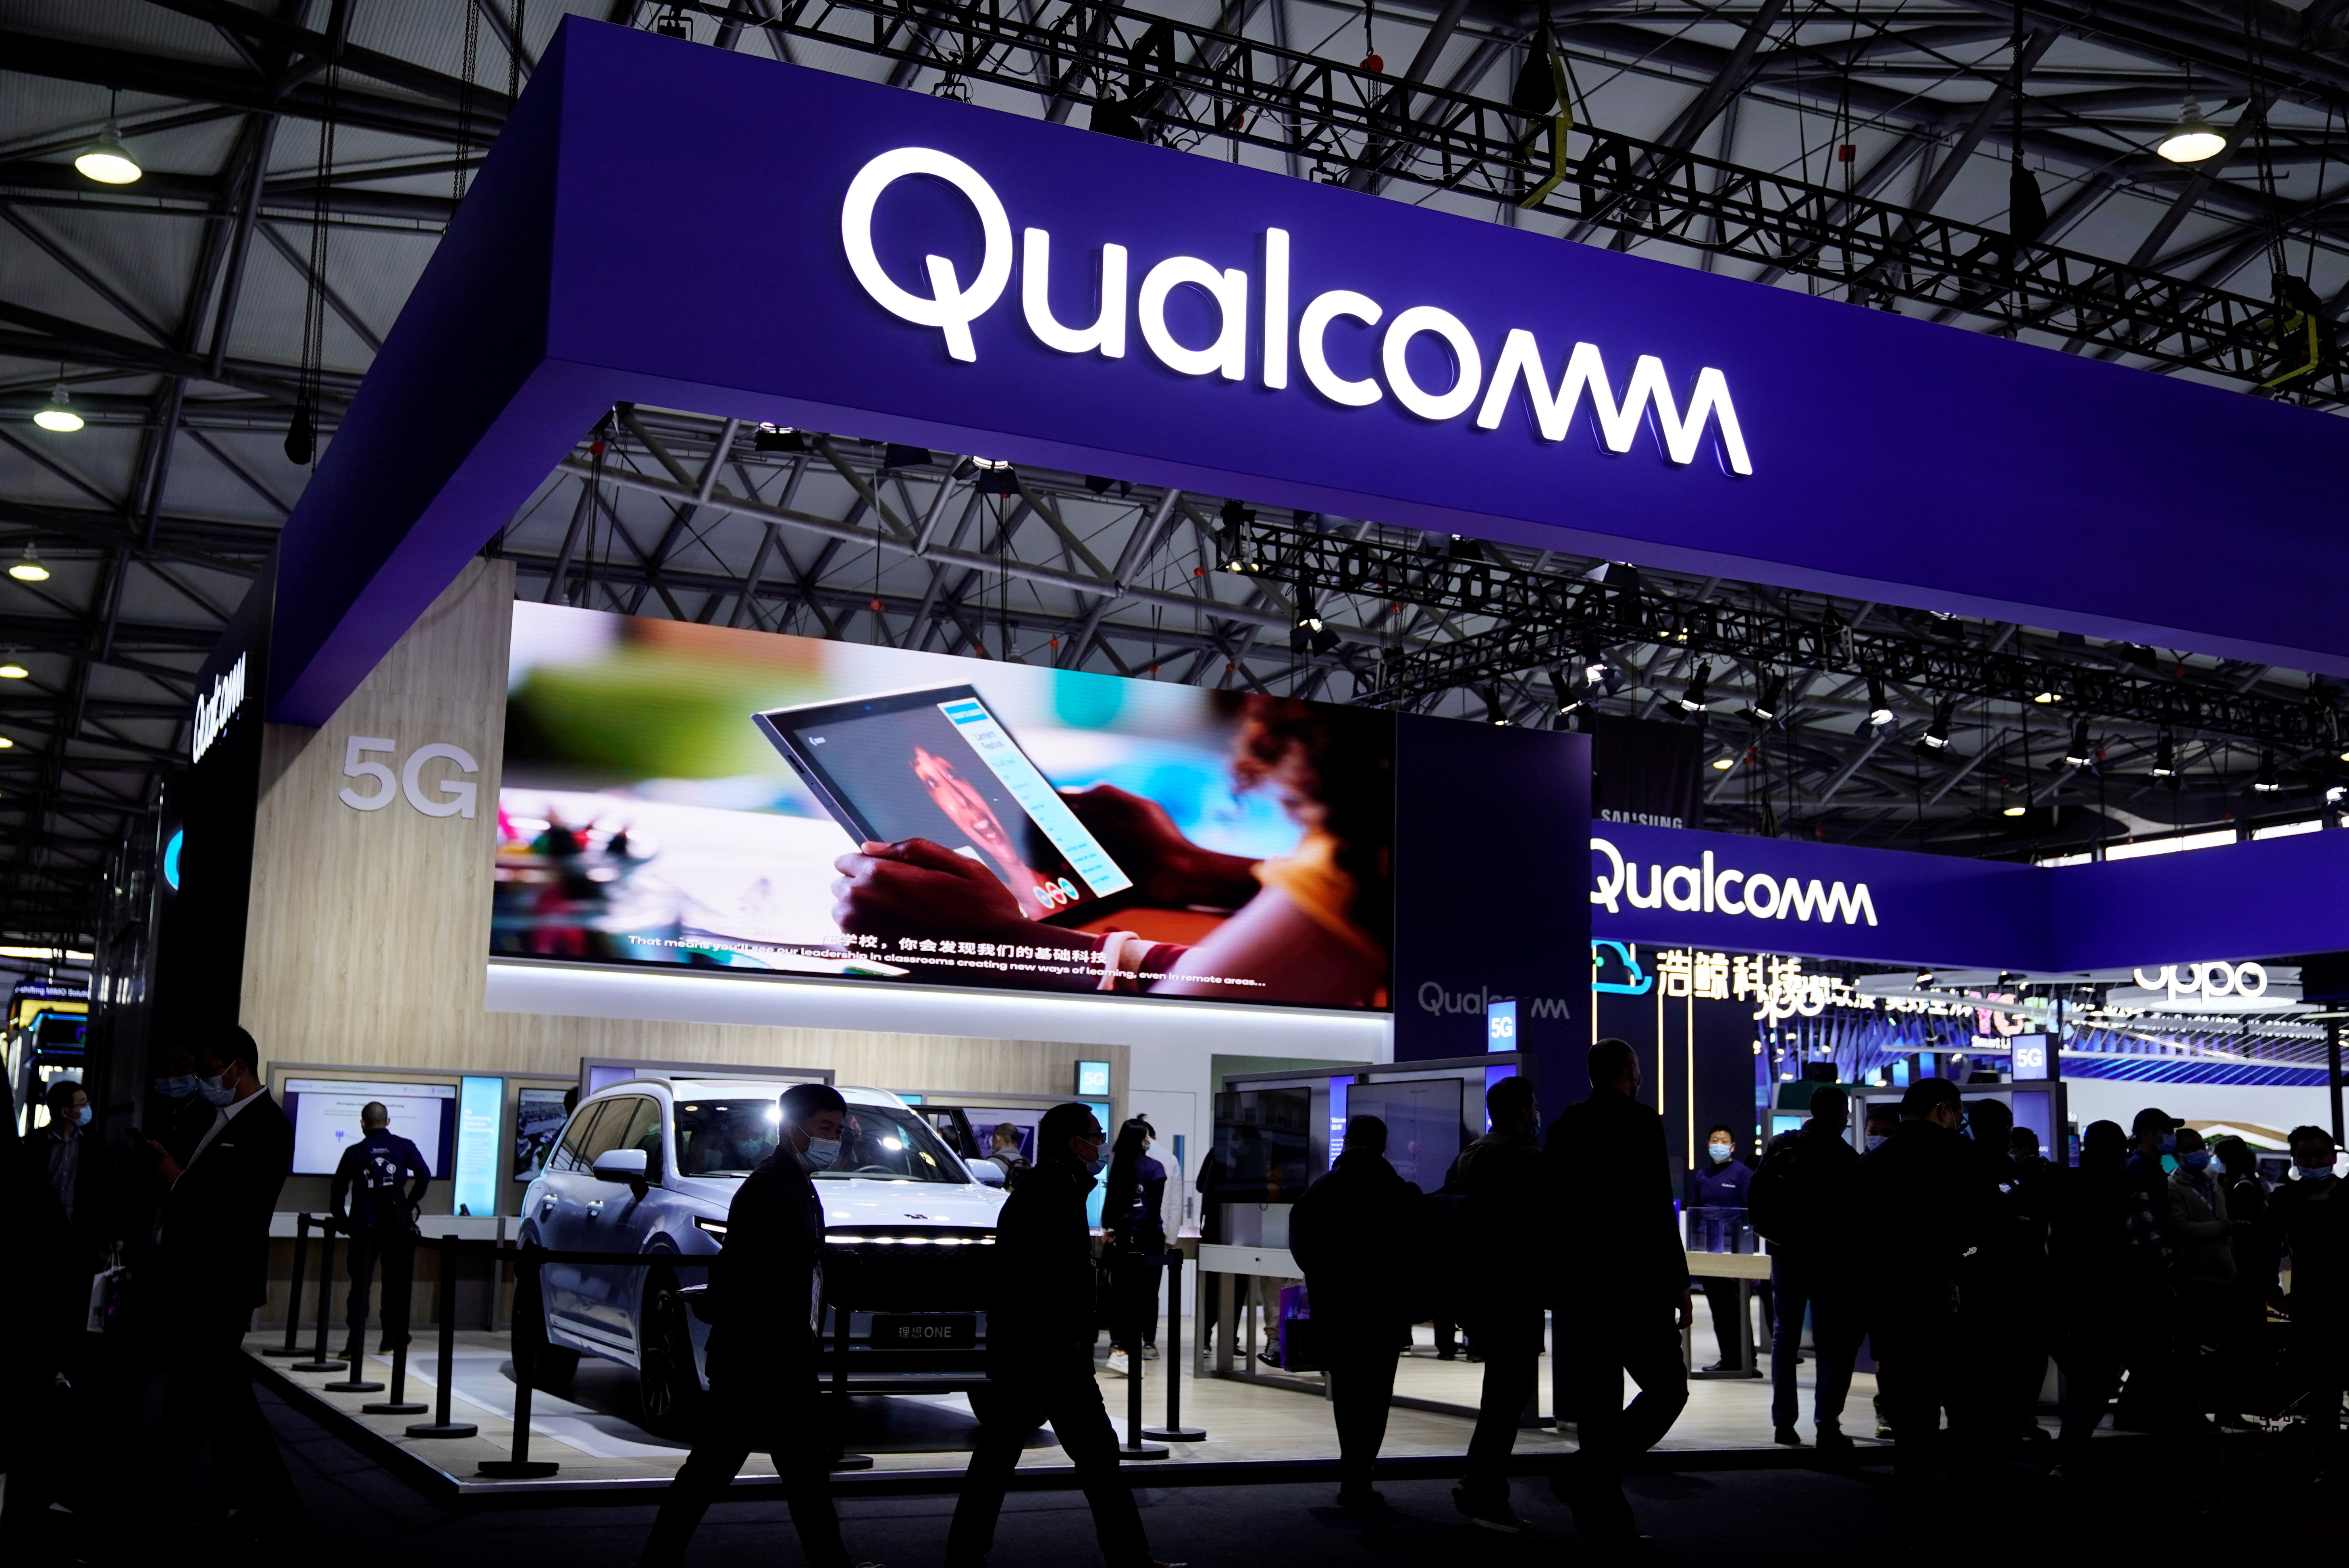 People visit a Qualcomm booth at the Mobile World Congress (MWC) in Shanghai